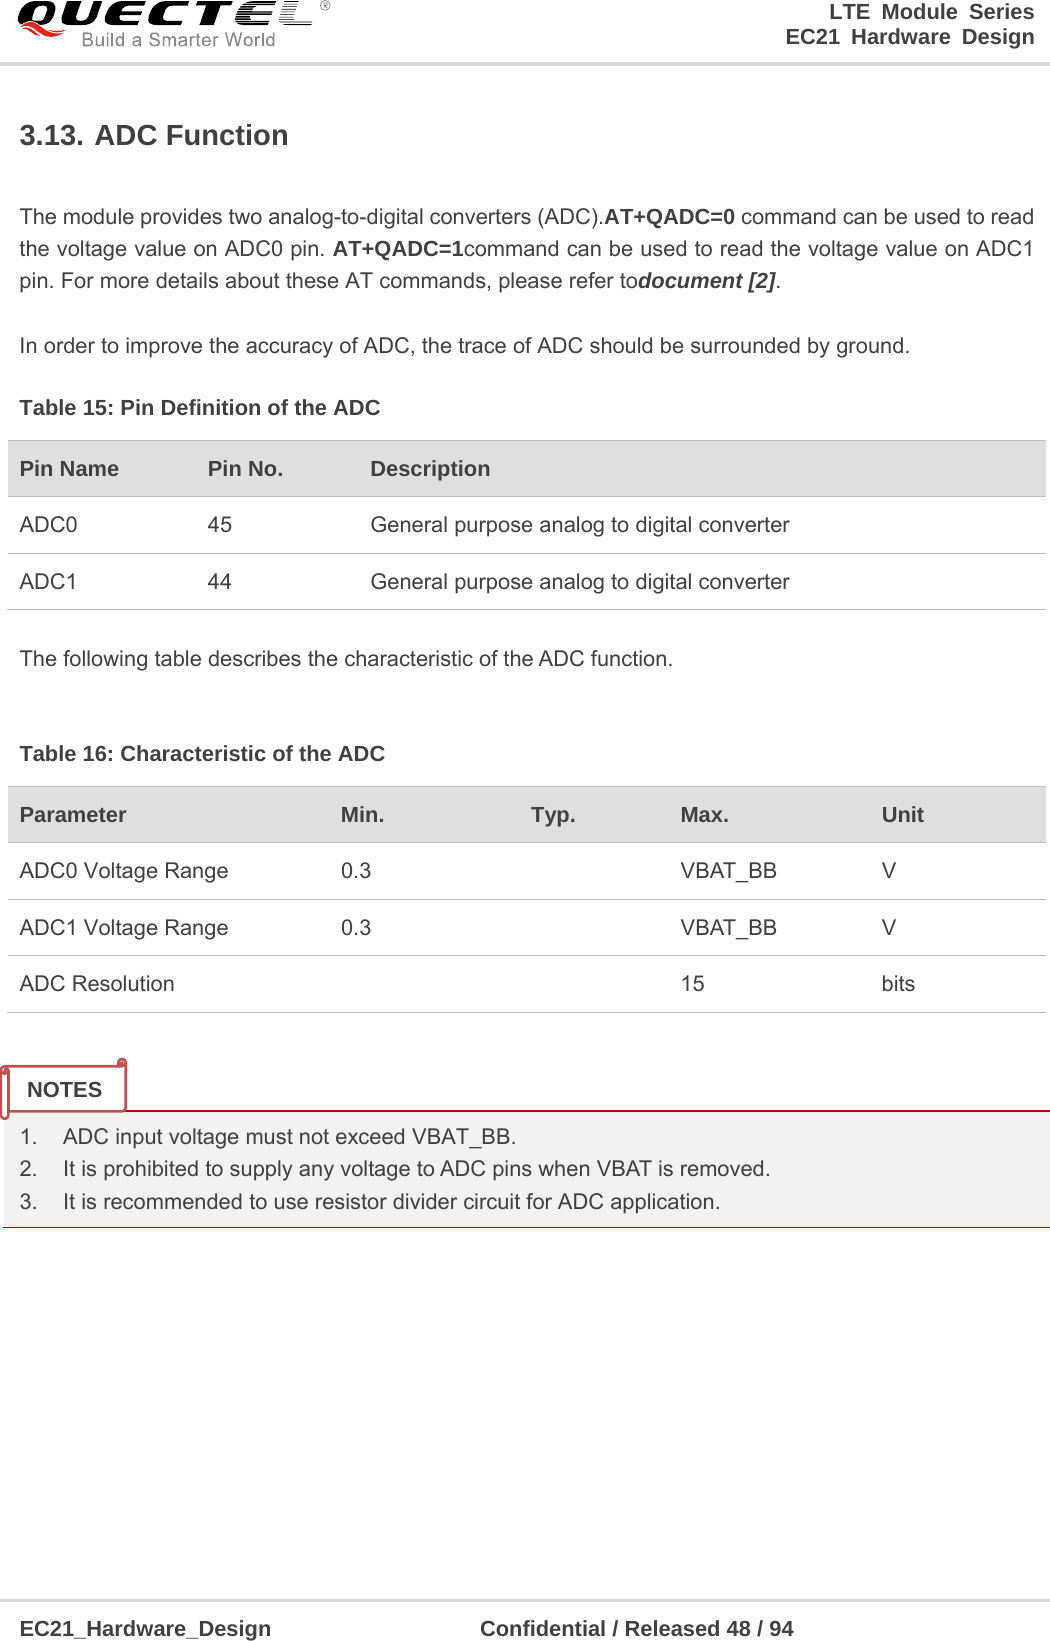 LTE Module Series                                                                 EC21 Hardware Design  EC21_Hardware_Design                   Confidential / Released 48 / 94    3.13. ADC Function  The module provides two analog-to-digital converters (ADC).AT+QADC=0 command can be used to read the voltage value on ADC0 pin. AT+QADC=1command can be used to read the voltage value on ADC1 pin. For more details about these AT commands, please refer todocument [2].  In order to improve the accuracy of ADC, the trace of ADC should be surrounded by ground. Table 15: Pin Definition of the ADC Pin Name  Pin No.  Description ADC0  45  General purpose analog to digital converter ADC1  44  General purpose analog to digital converter  The following table describes the characteristic of the ADC function.  Table 16: Characteristic of the ADC Parameter  Min.  Typ.  Max.  Unit ADC0 Voltage Range  0.3    VBAT_BB  V ADC1 Voltage Range  0.3    VBAT_BB  V ADC Resolution      15  bits   1.    ADC input voltage must not exceed VBAT_BB. 2.    It is prohibited to supply any voltage to ADC pins when VBAT is removed. 3.    It is recommended to use resistor divider circuit for ADC application.       NOTES 